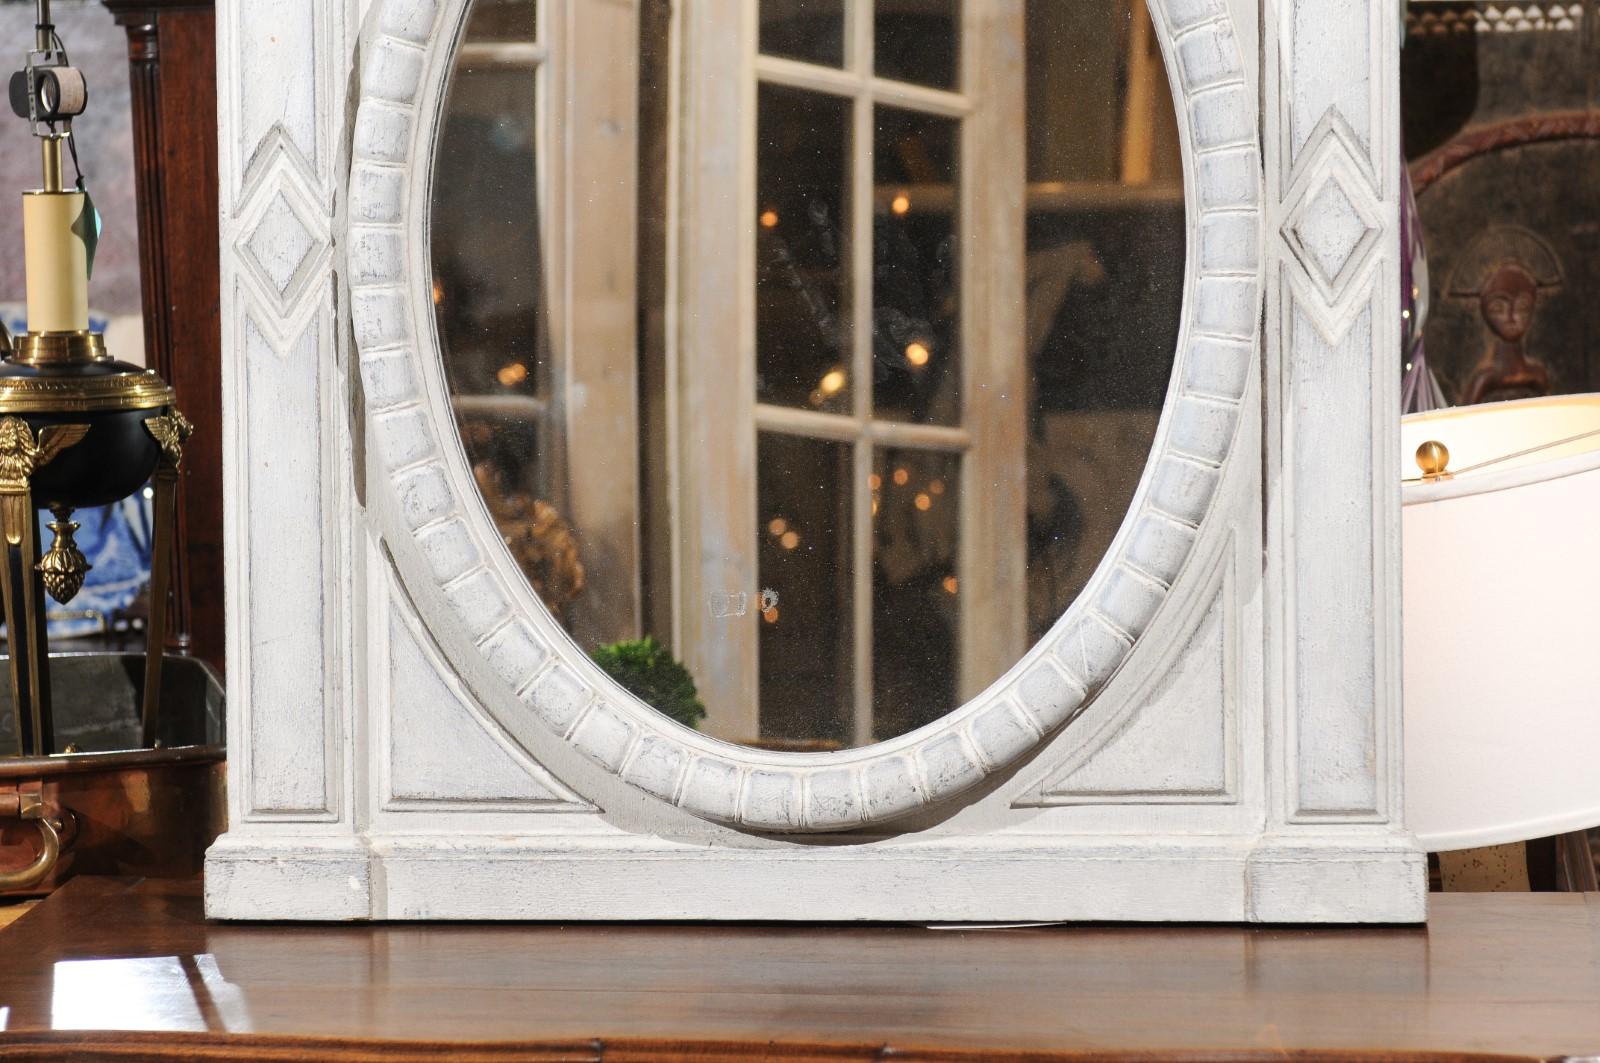 A Renaissance style Belgian painted wood mirror from the mid-19th century, with broken arch pediment and oval mirror plate. We currently have two available, priced and sold individually. Born in Italy during the 1850s, this exquisite Renaissance